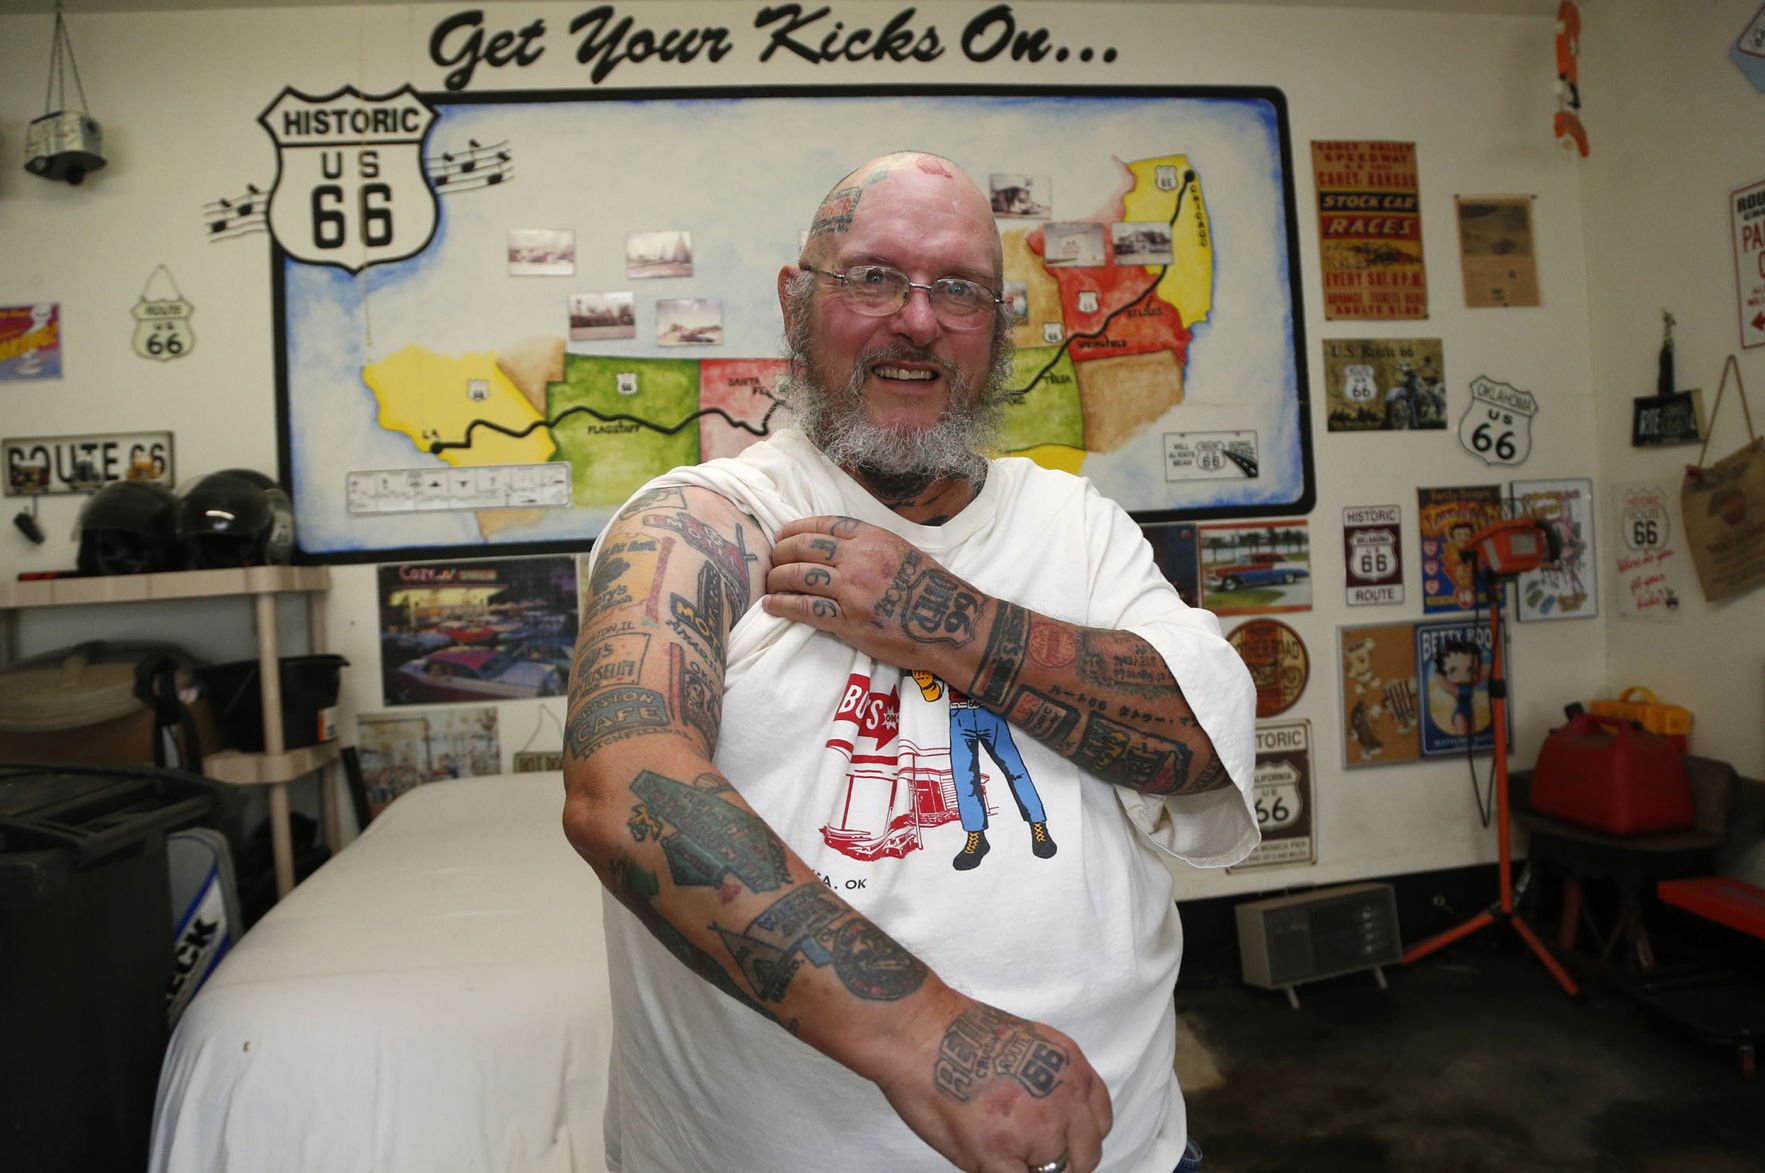 Just A Car Guy: Cool tattoos